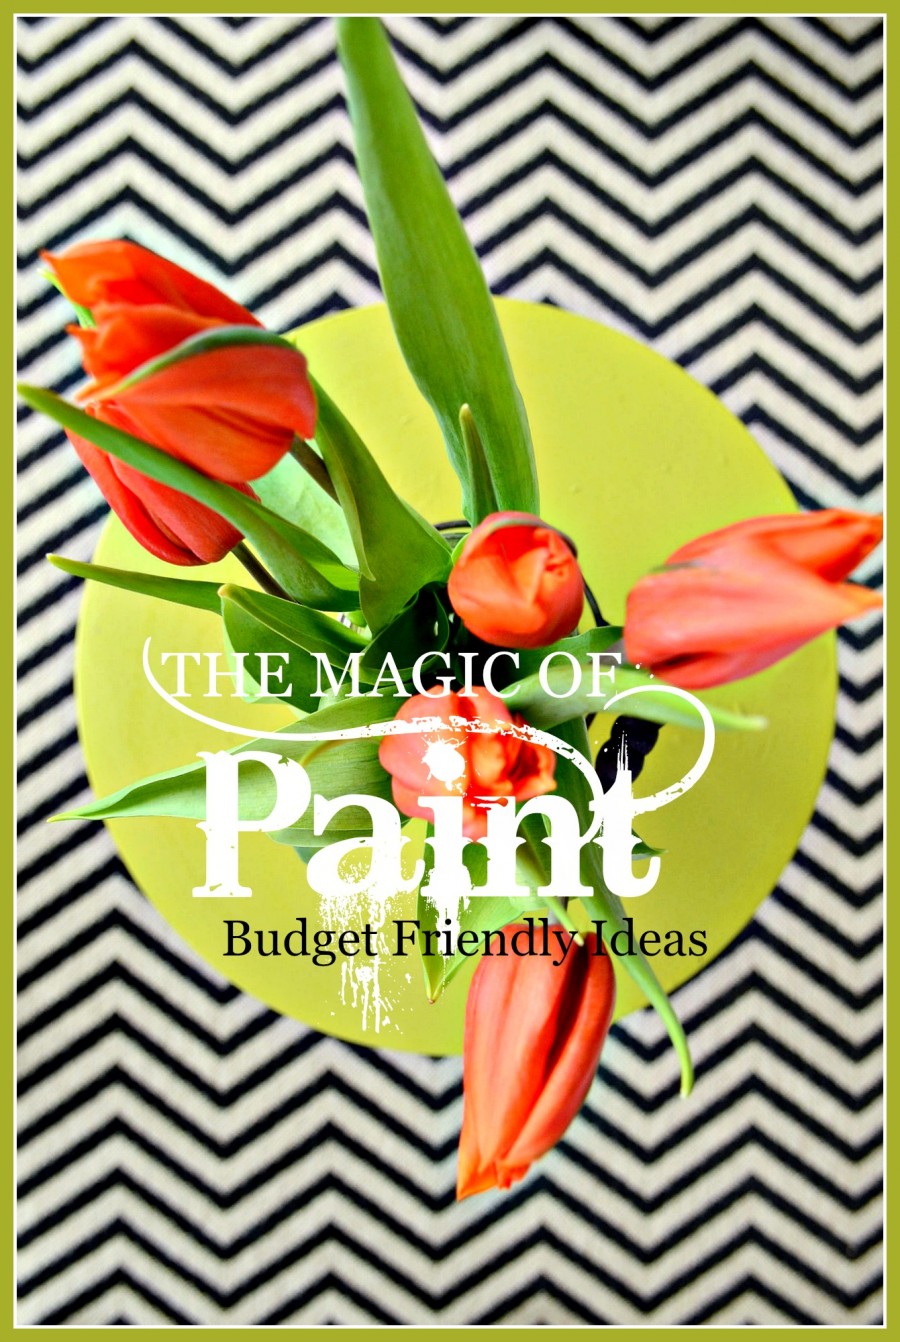 THE MAGIC OF PAINT- BUDGET FRIENDLY IDEAS